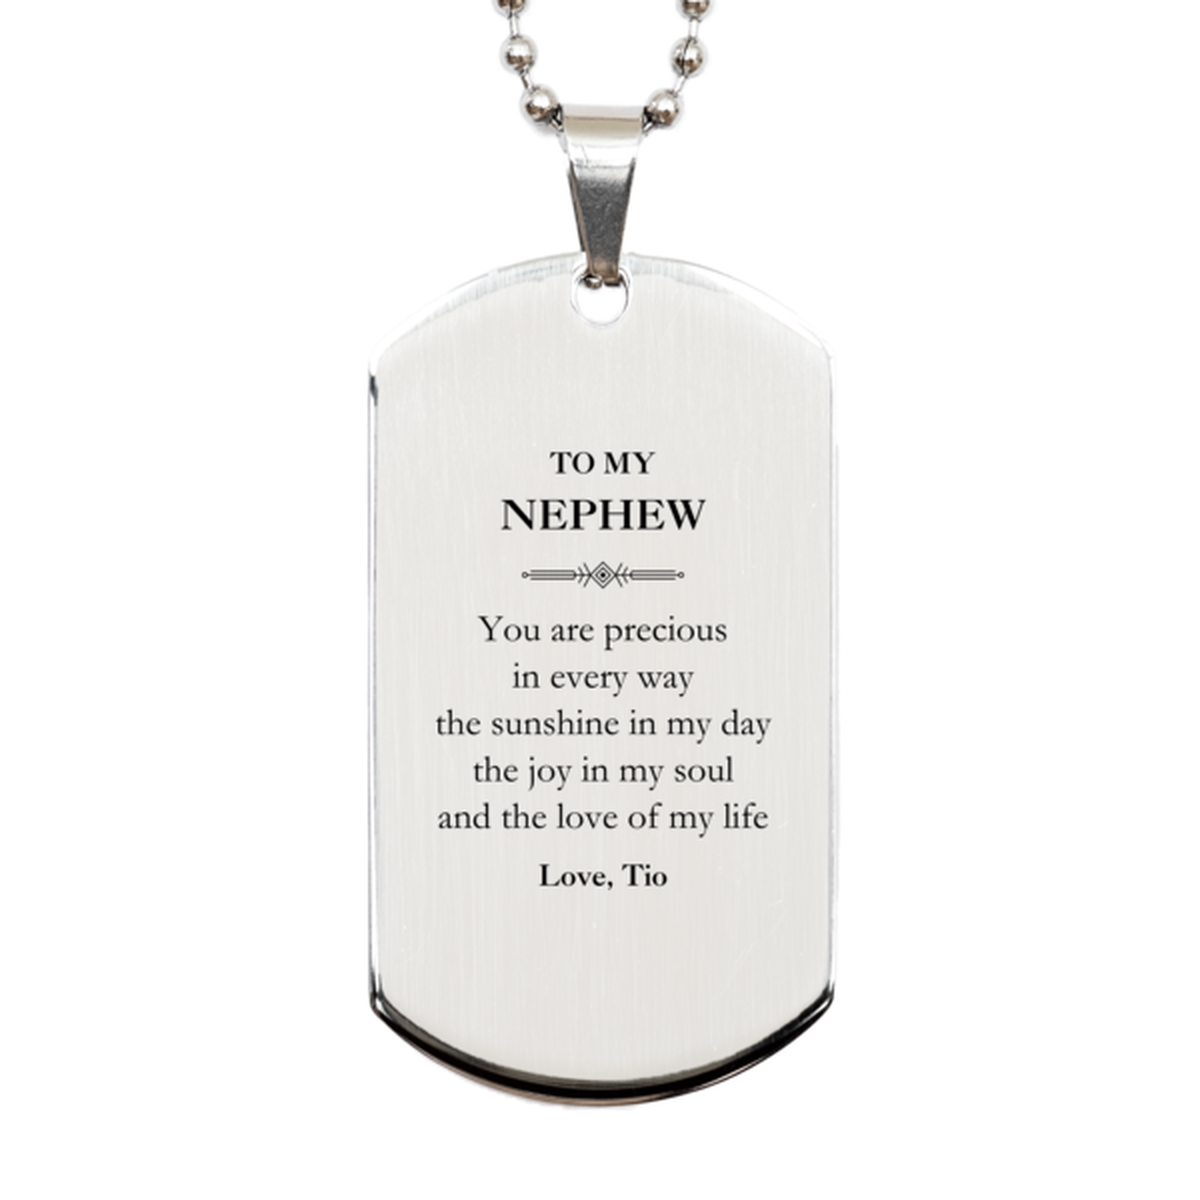 Graduation Gifts for Nephew Silver Dog Tag Present from Tio, Christmas Nephew Birthday Gifts Nephew You are precious in every way the sunshine in my day. Love, Tio